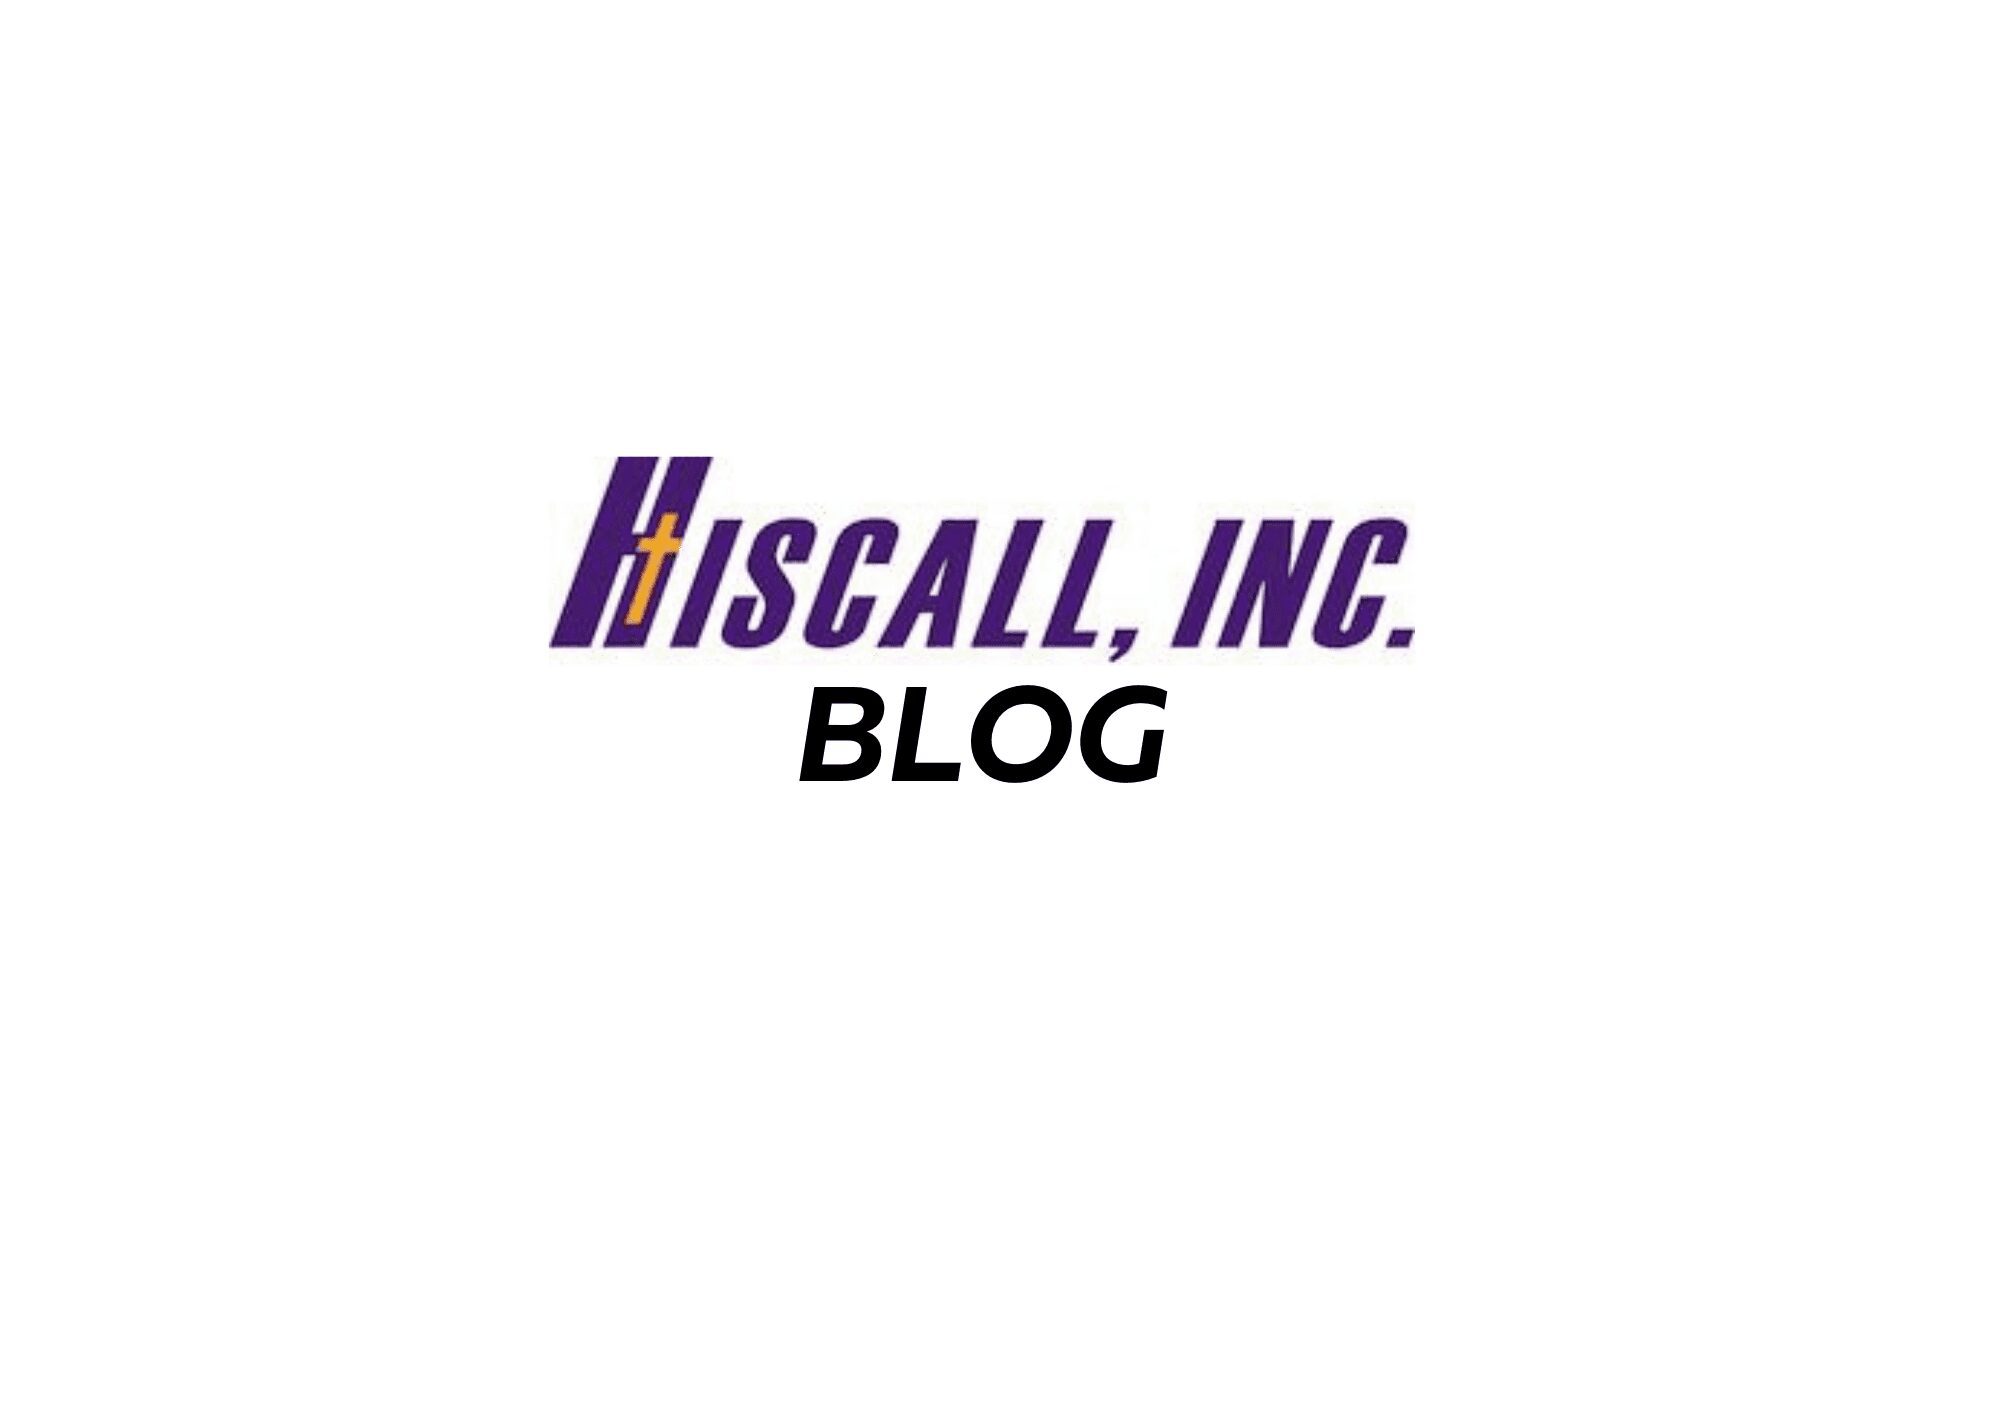 Join Hiscall, Inc. at the 6th Annual Hiscall Technology Showcase, September 11, 2014, Nashville TN